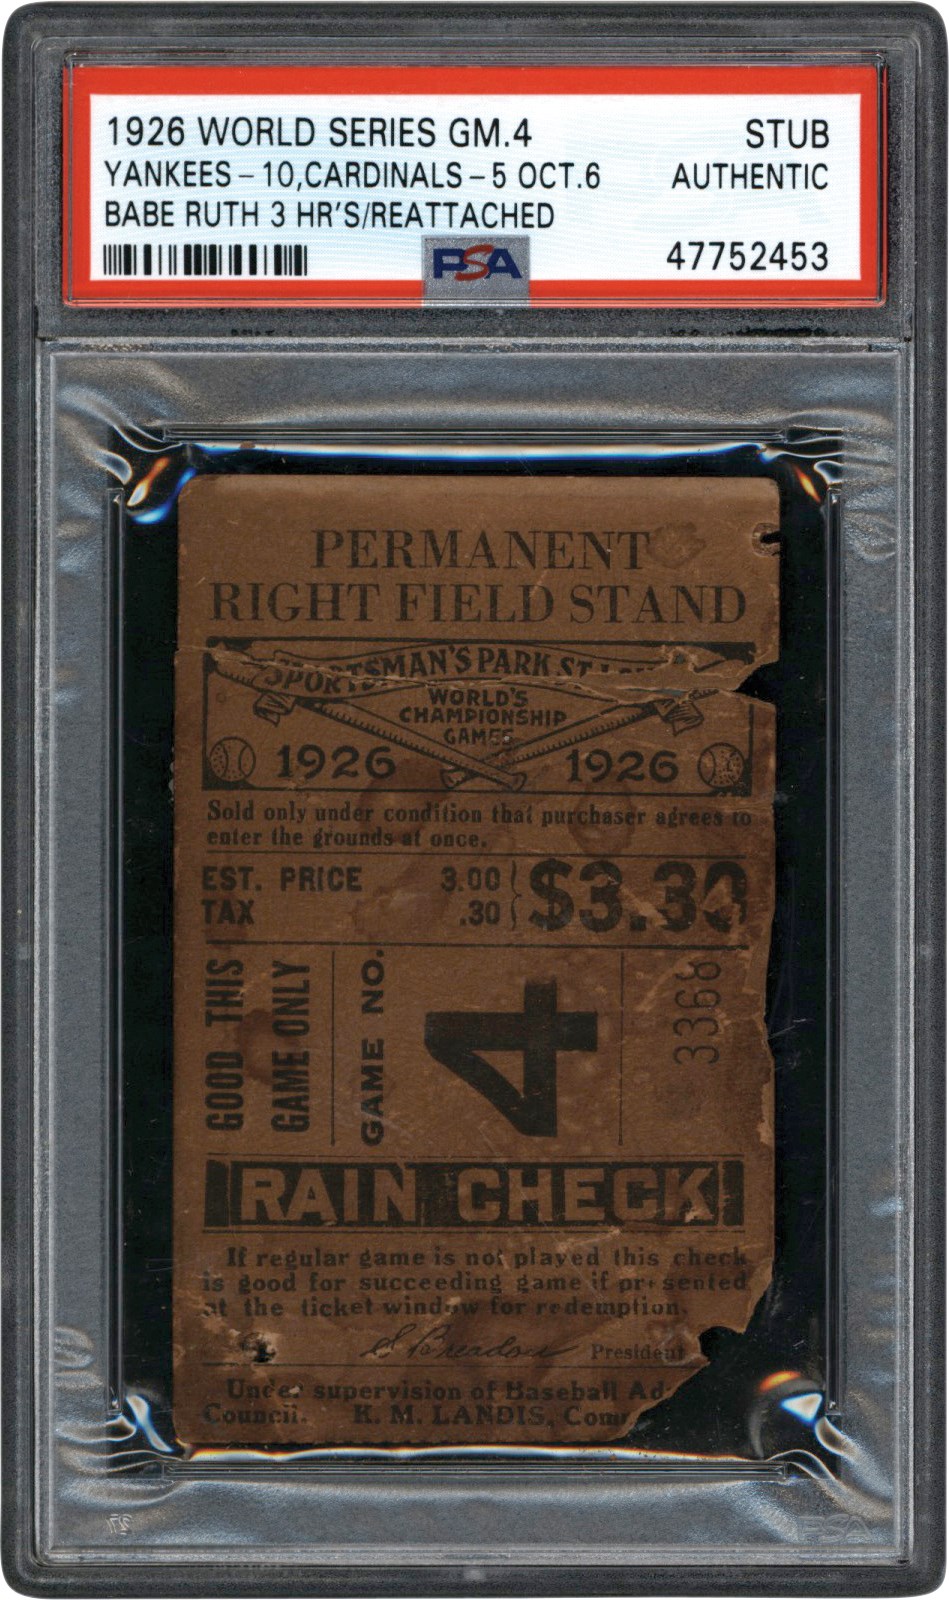 Ruth and Gehrig - 1926 World Series Game 4 Ticket Stub - Babe Ruth Hits 3 Home Runs "Johnny Sylvester Game" PSA Authentic